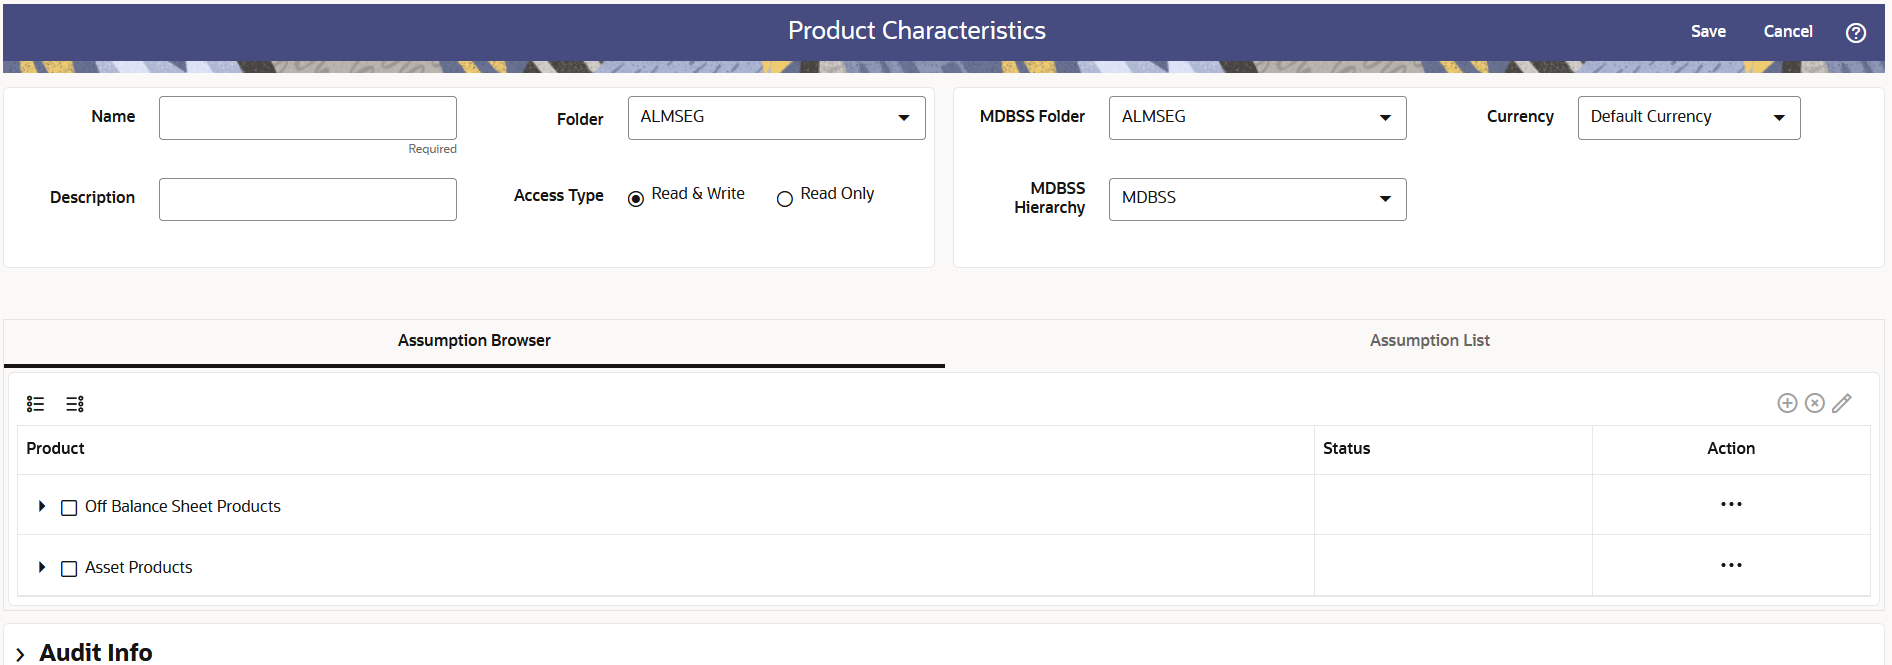 Product Characteristics Page